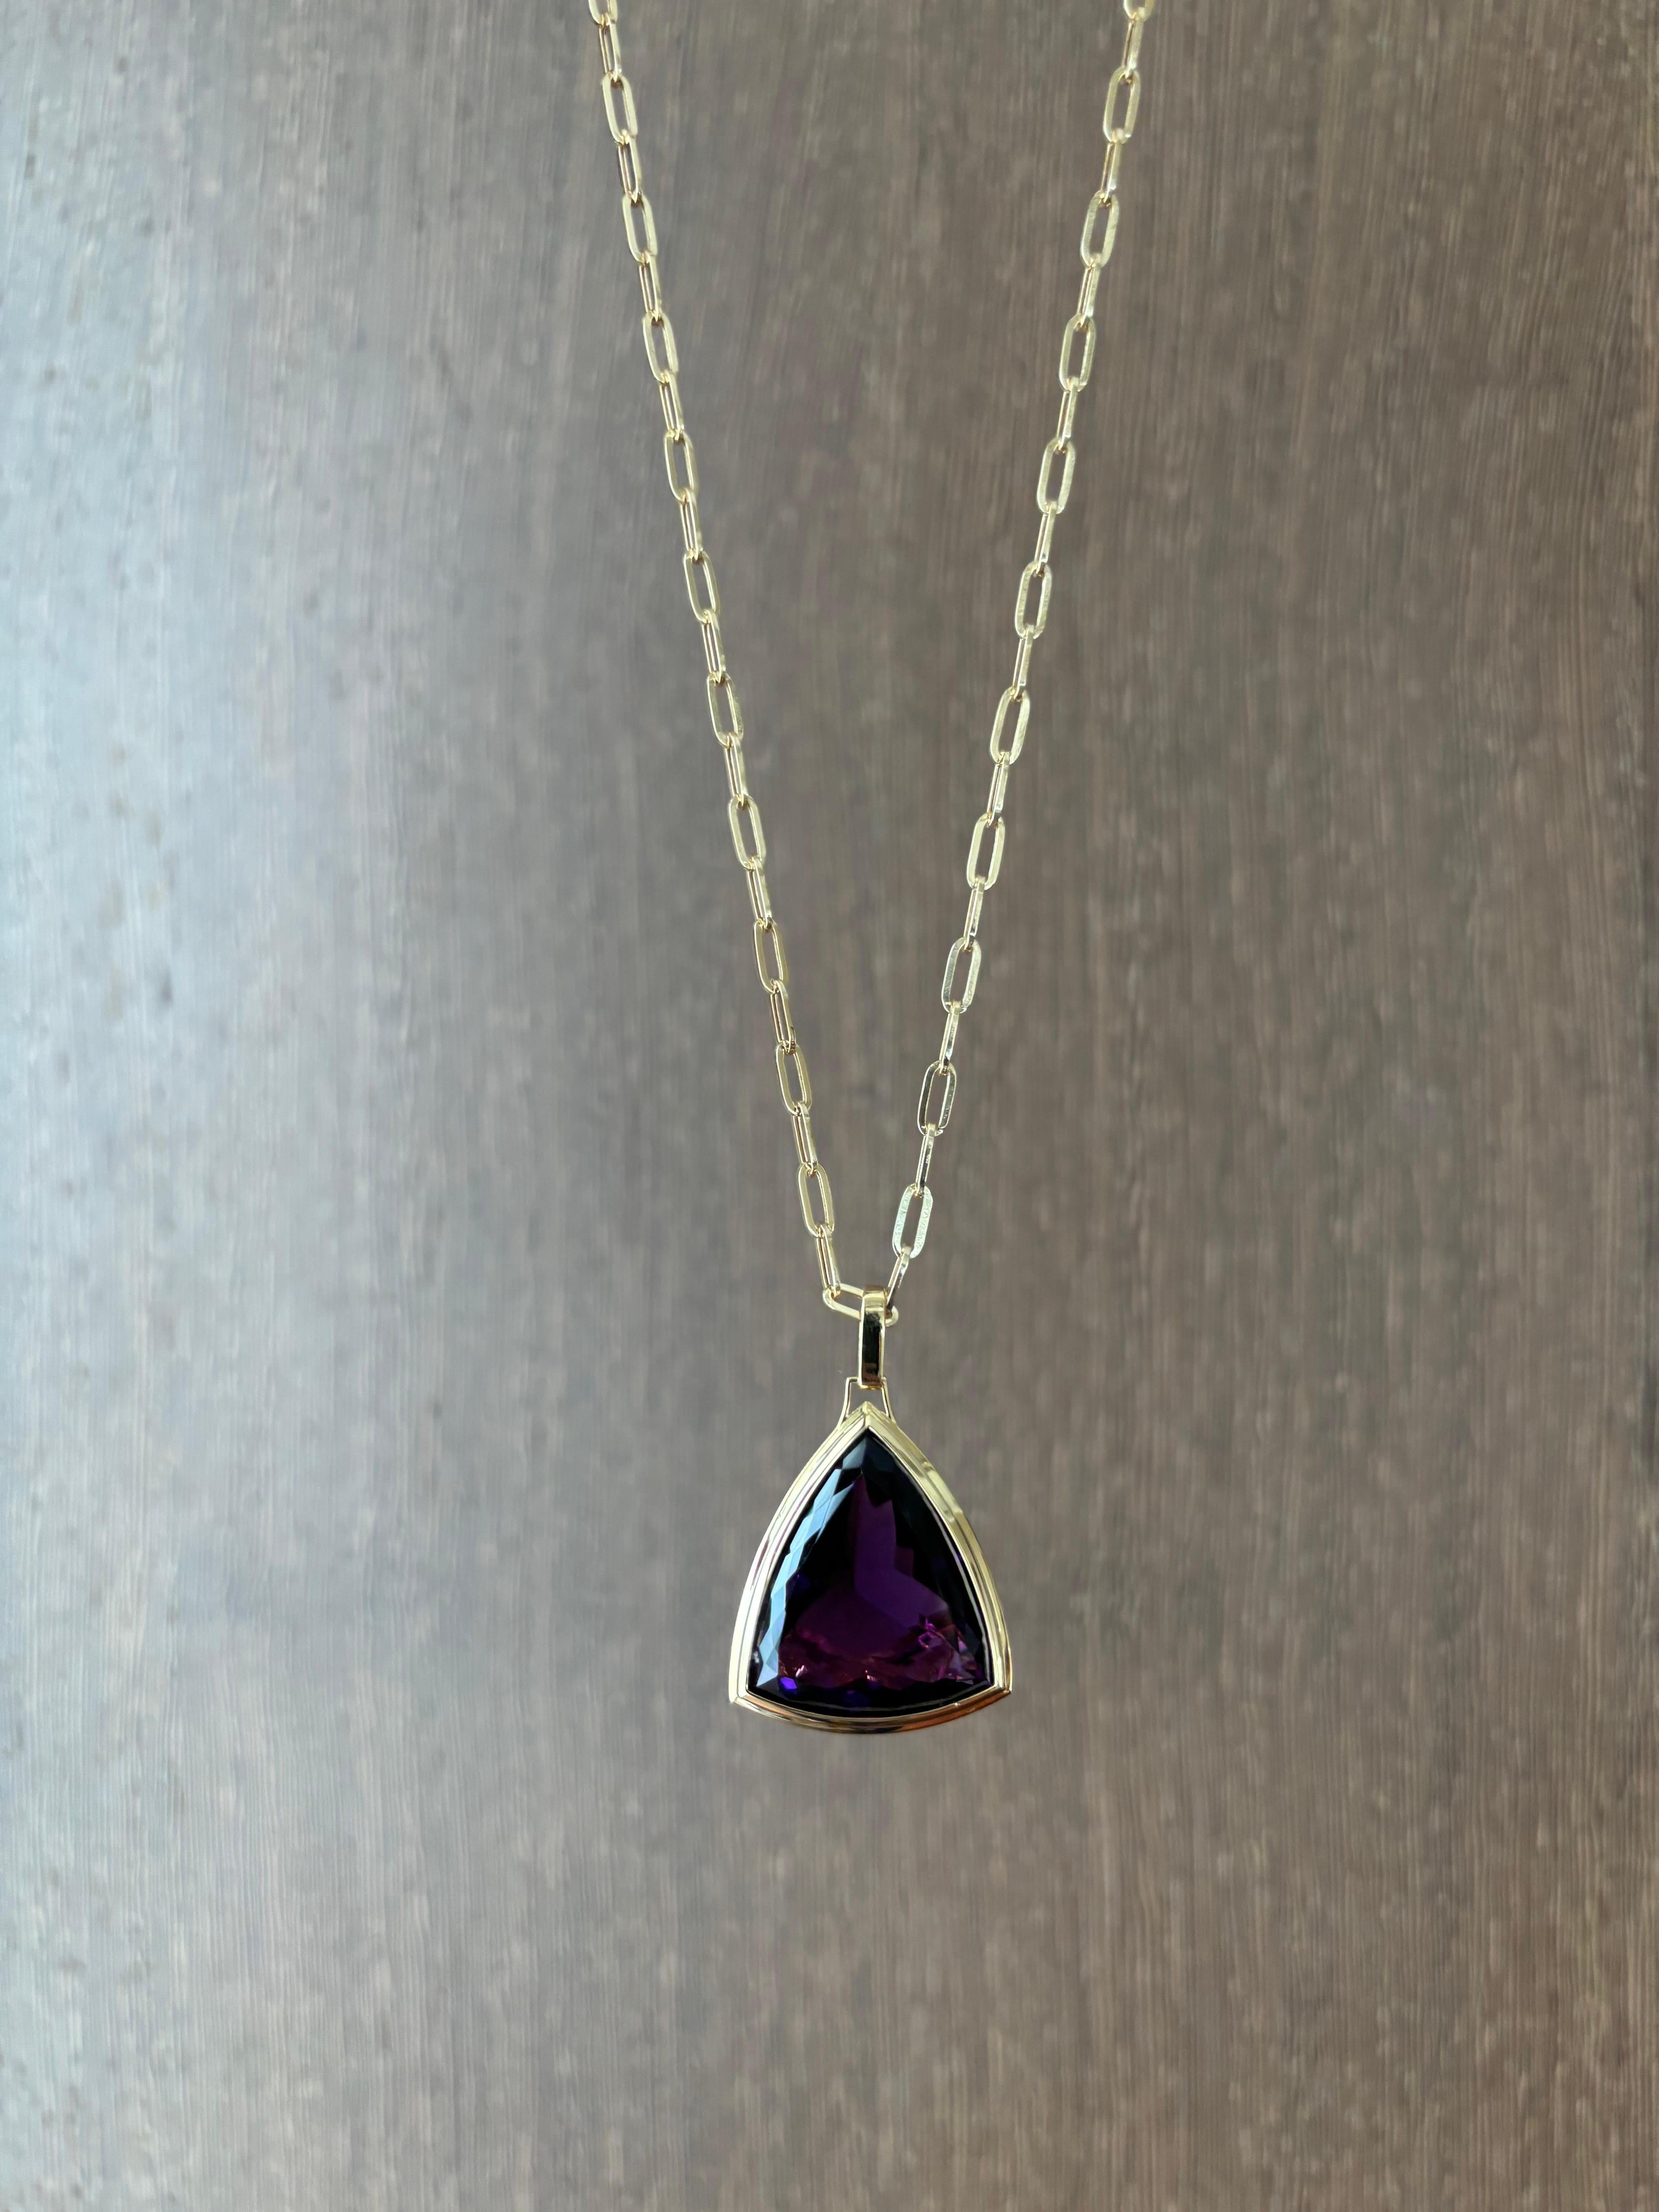 44.03 Carat Pear Shape Amethyst Pendant Necklace with Link Chain  In New Condition For Sale In Bangkok, Thailand